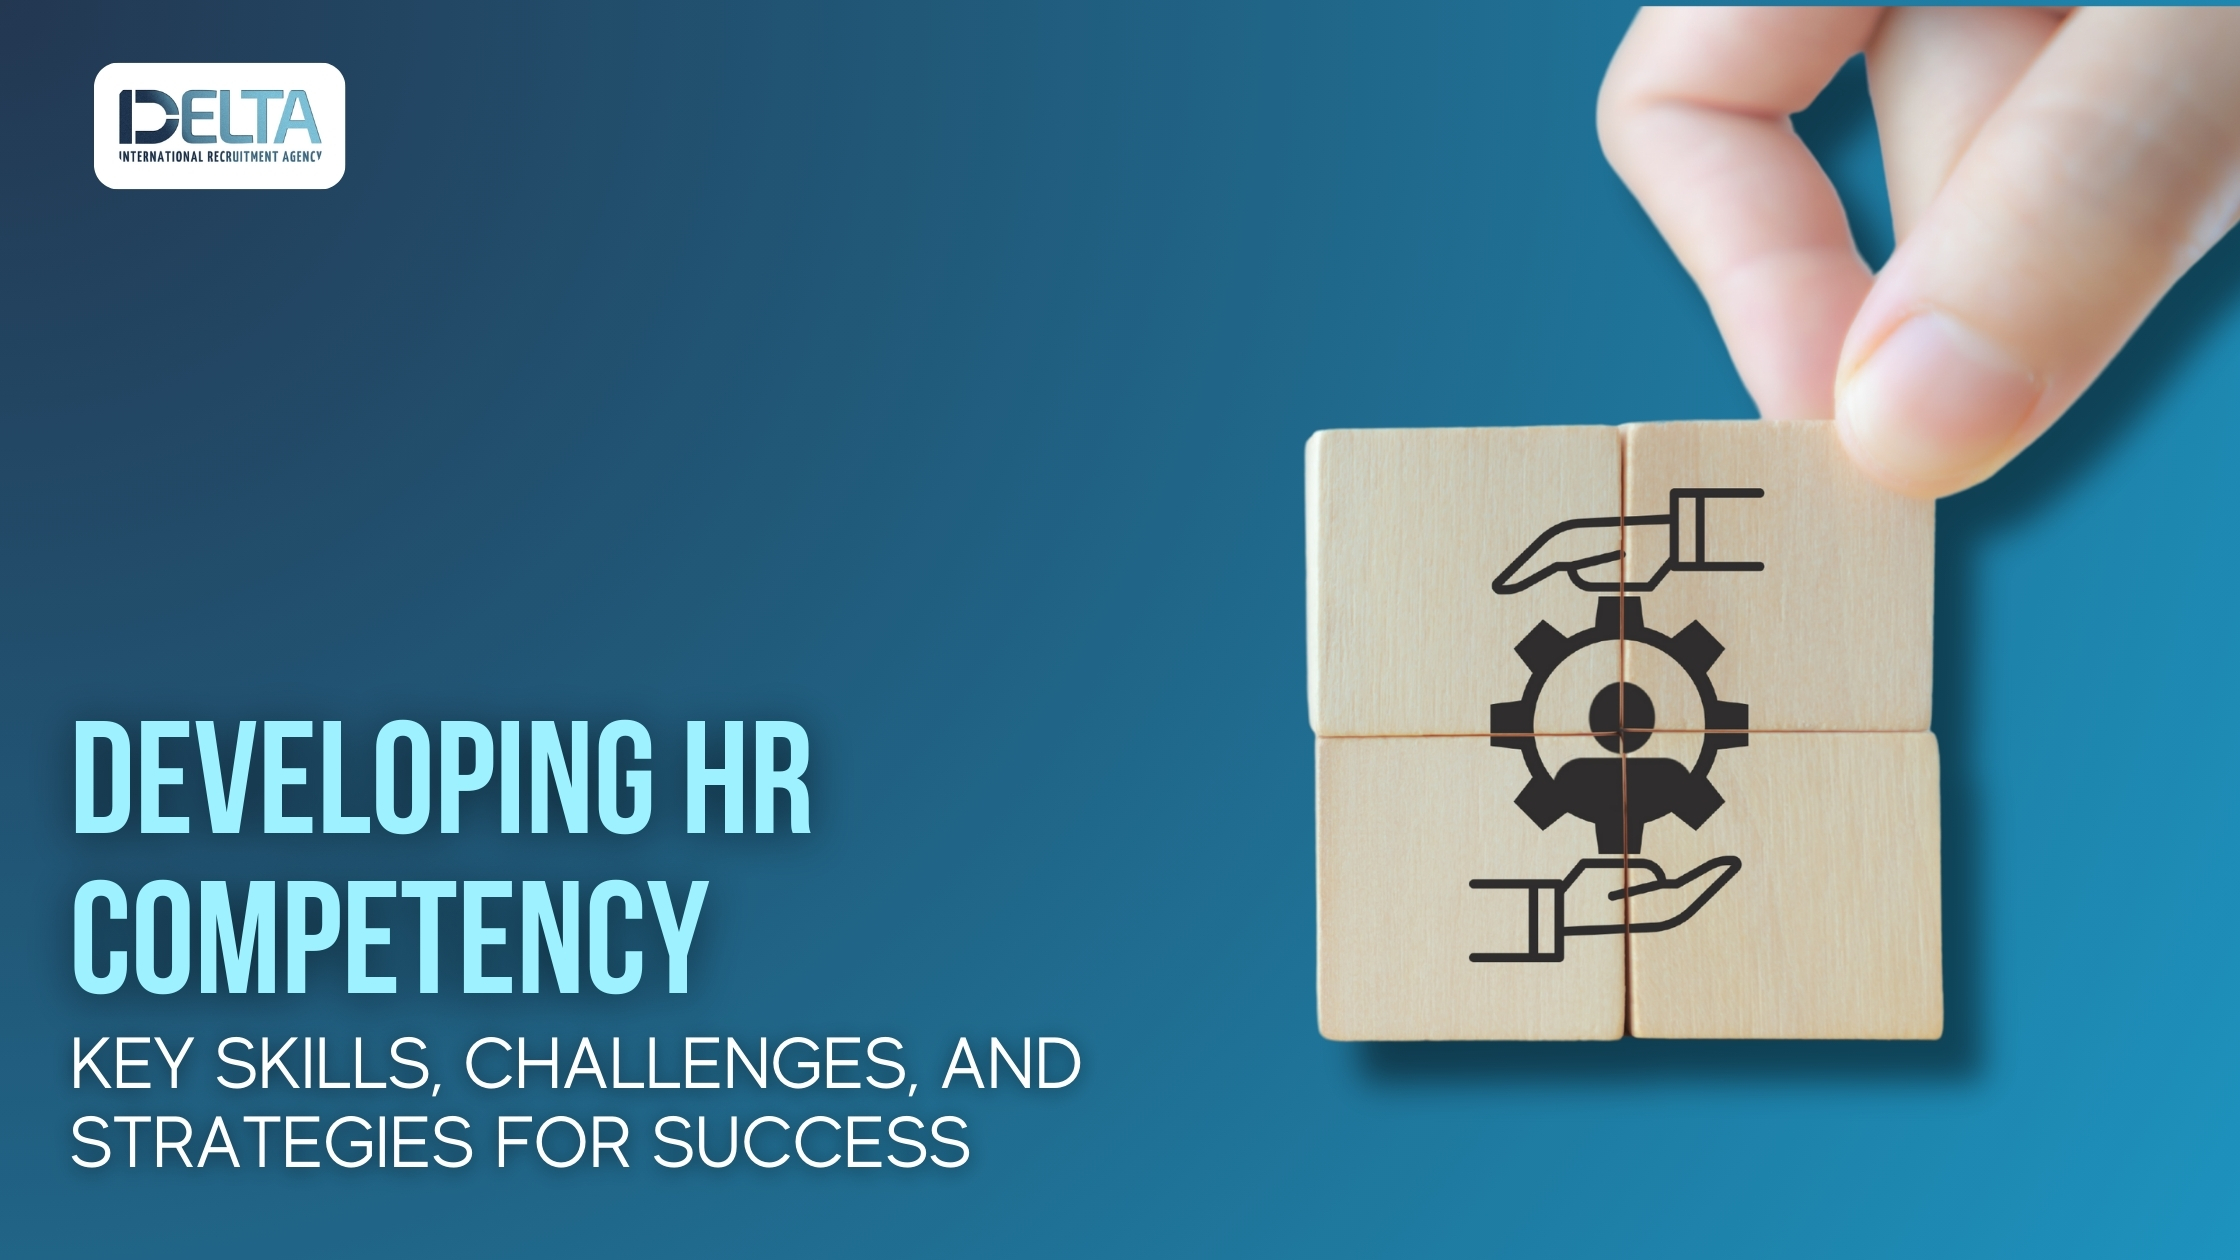 Developing HR Competency: Key Skills, Challenges, and Strategies for Success